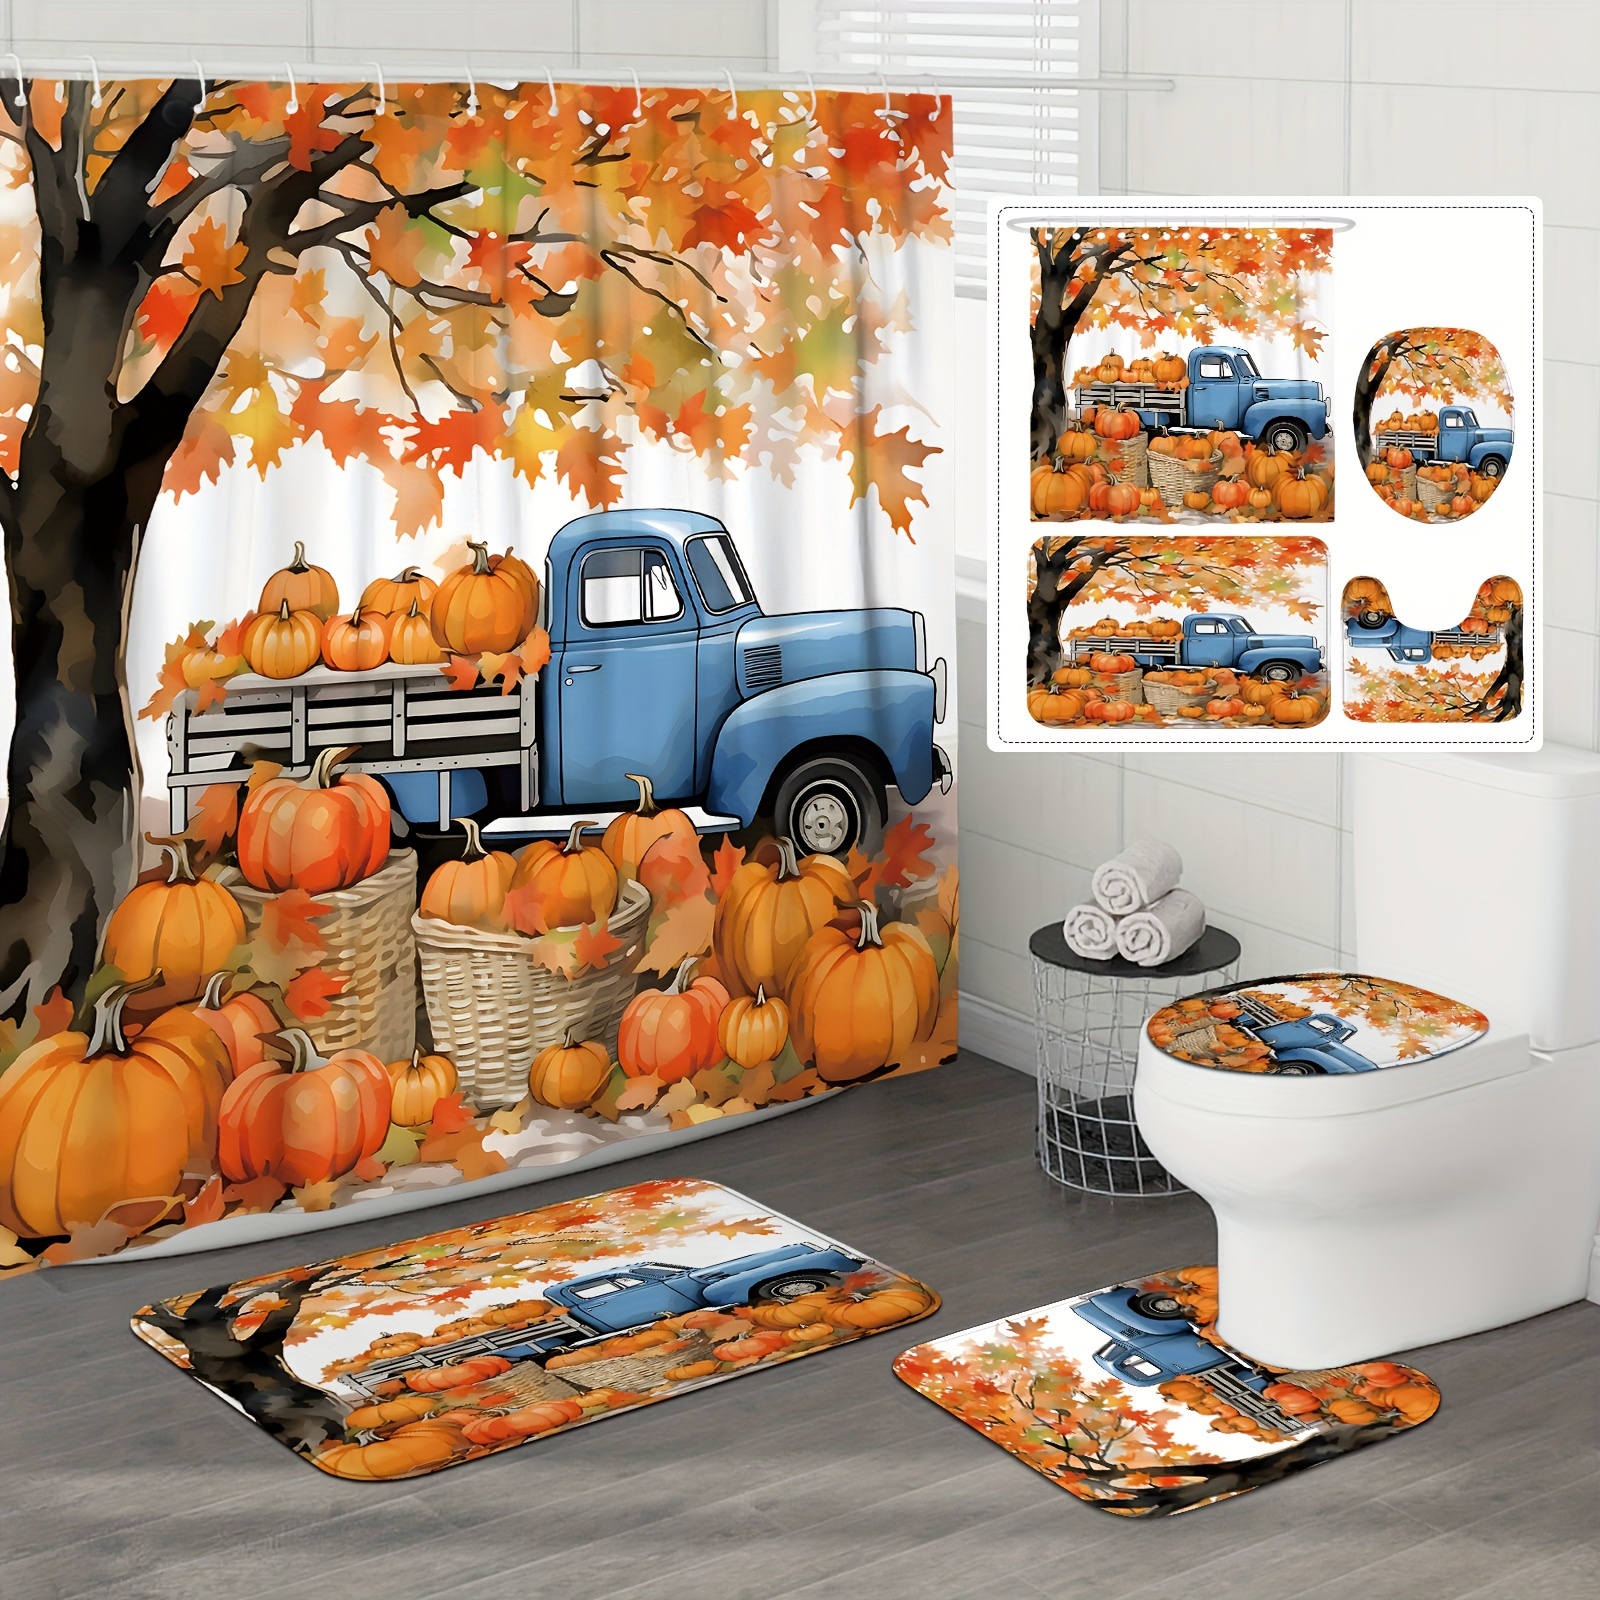 

Rustic Autumn Truck And Pumpkin Shower Curtain Set With Bath Mat, U-shape Toilet Cover, Water-resistant Polyester, Machine Washable, Includes 12 Hooks, Pastoral Theme For Bathroom Decor - 71x71 Inch